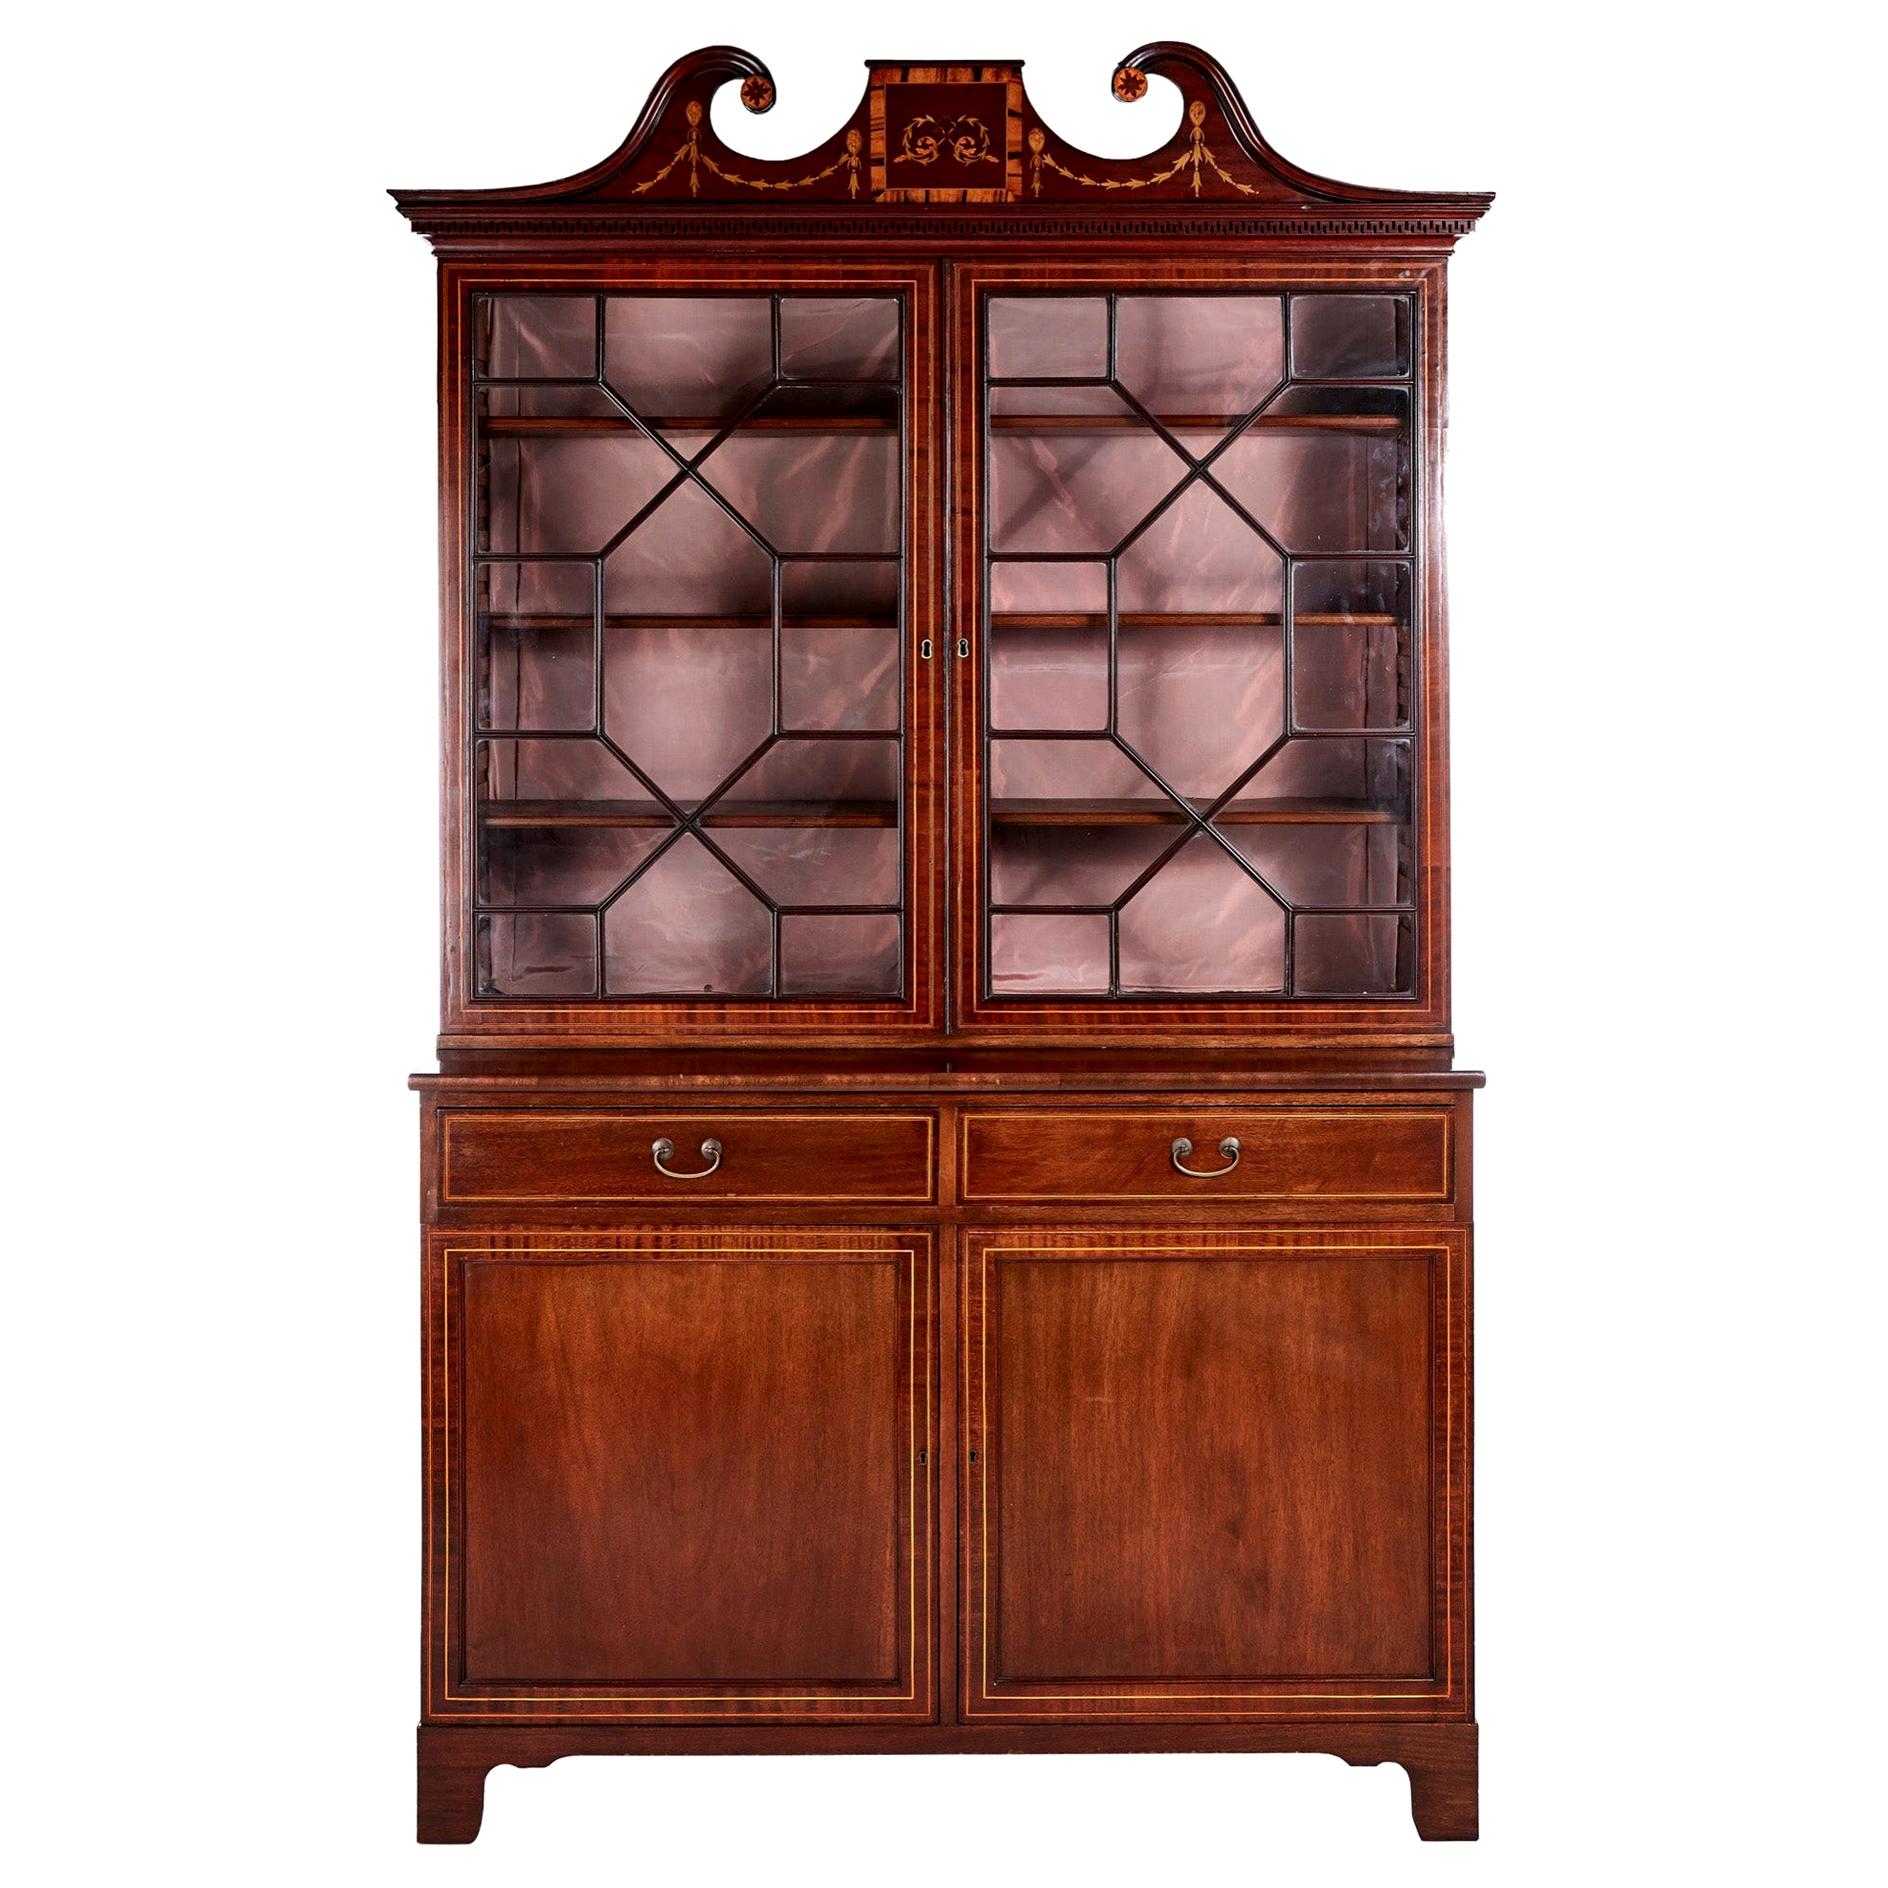 Outstanding Antique Mahogany Inlaid Bookcase